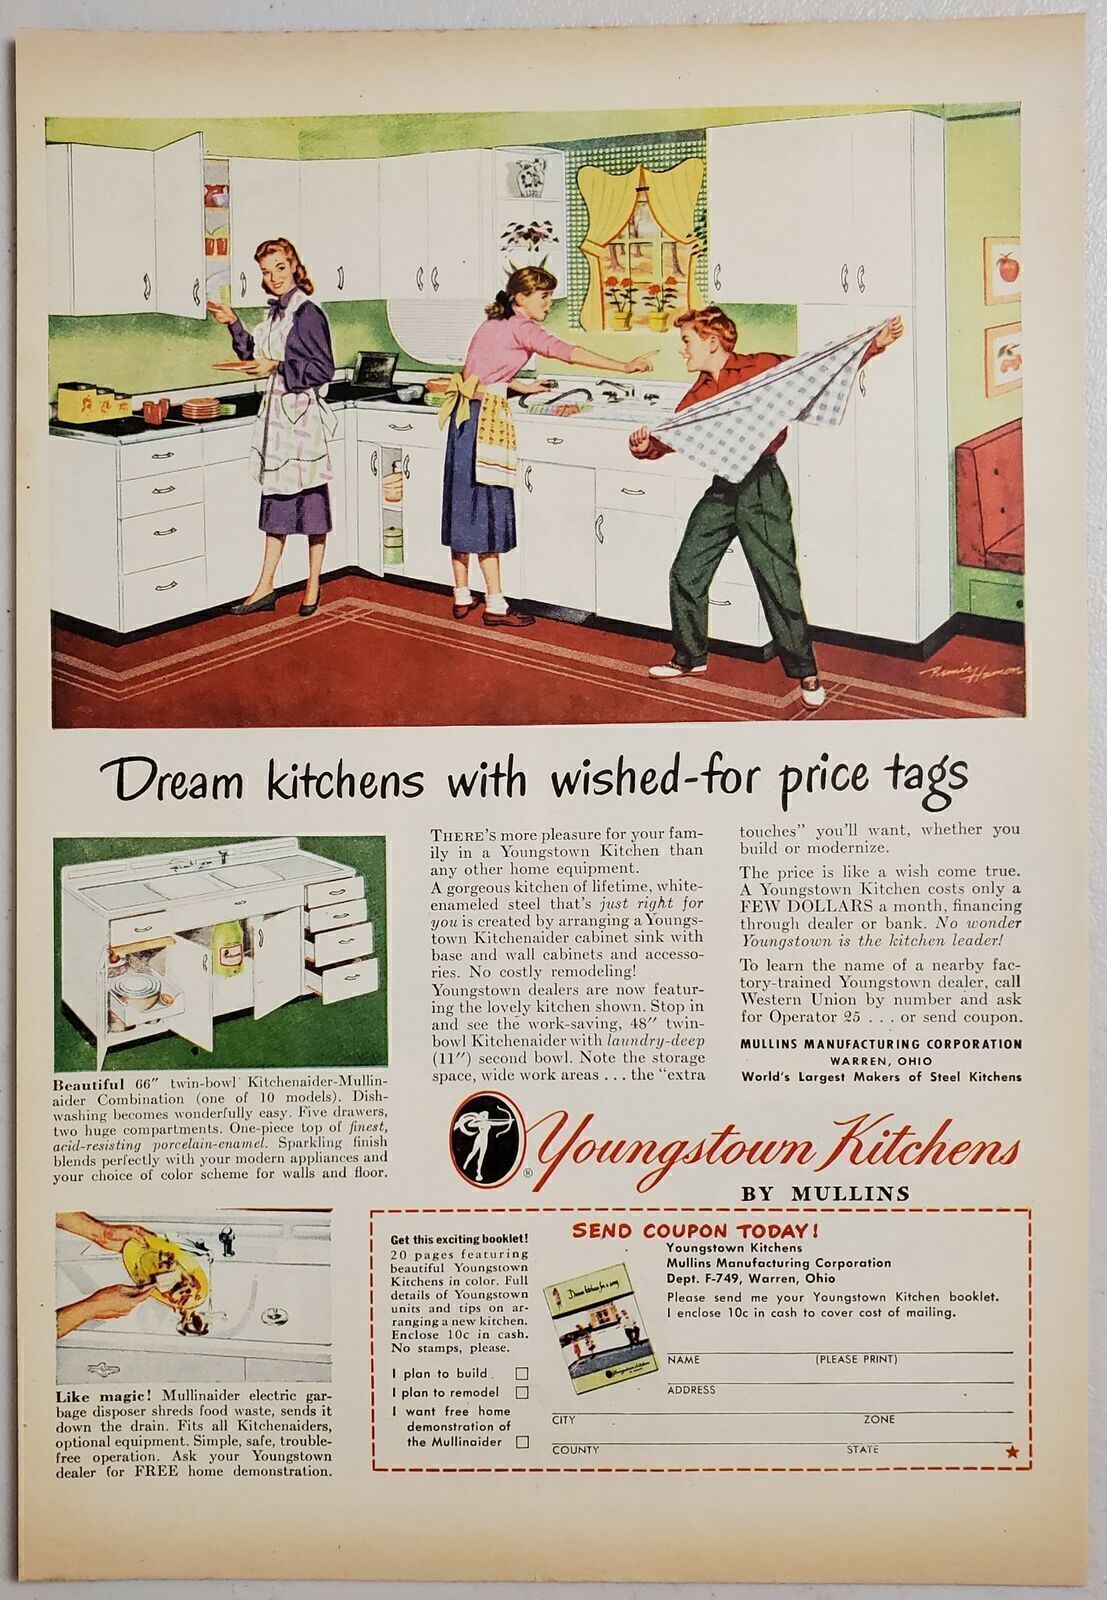 1949 Print Ad Youngstown Kitchens by Mullins Family at Home Warren,Ohio